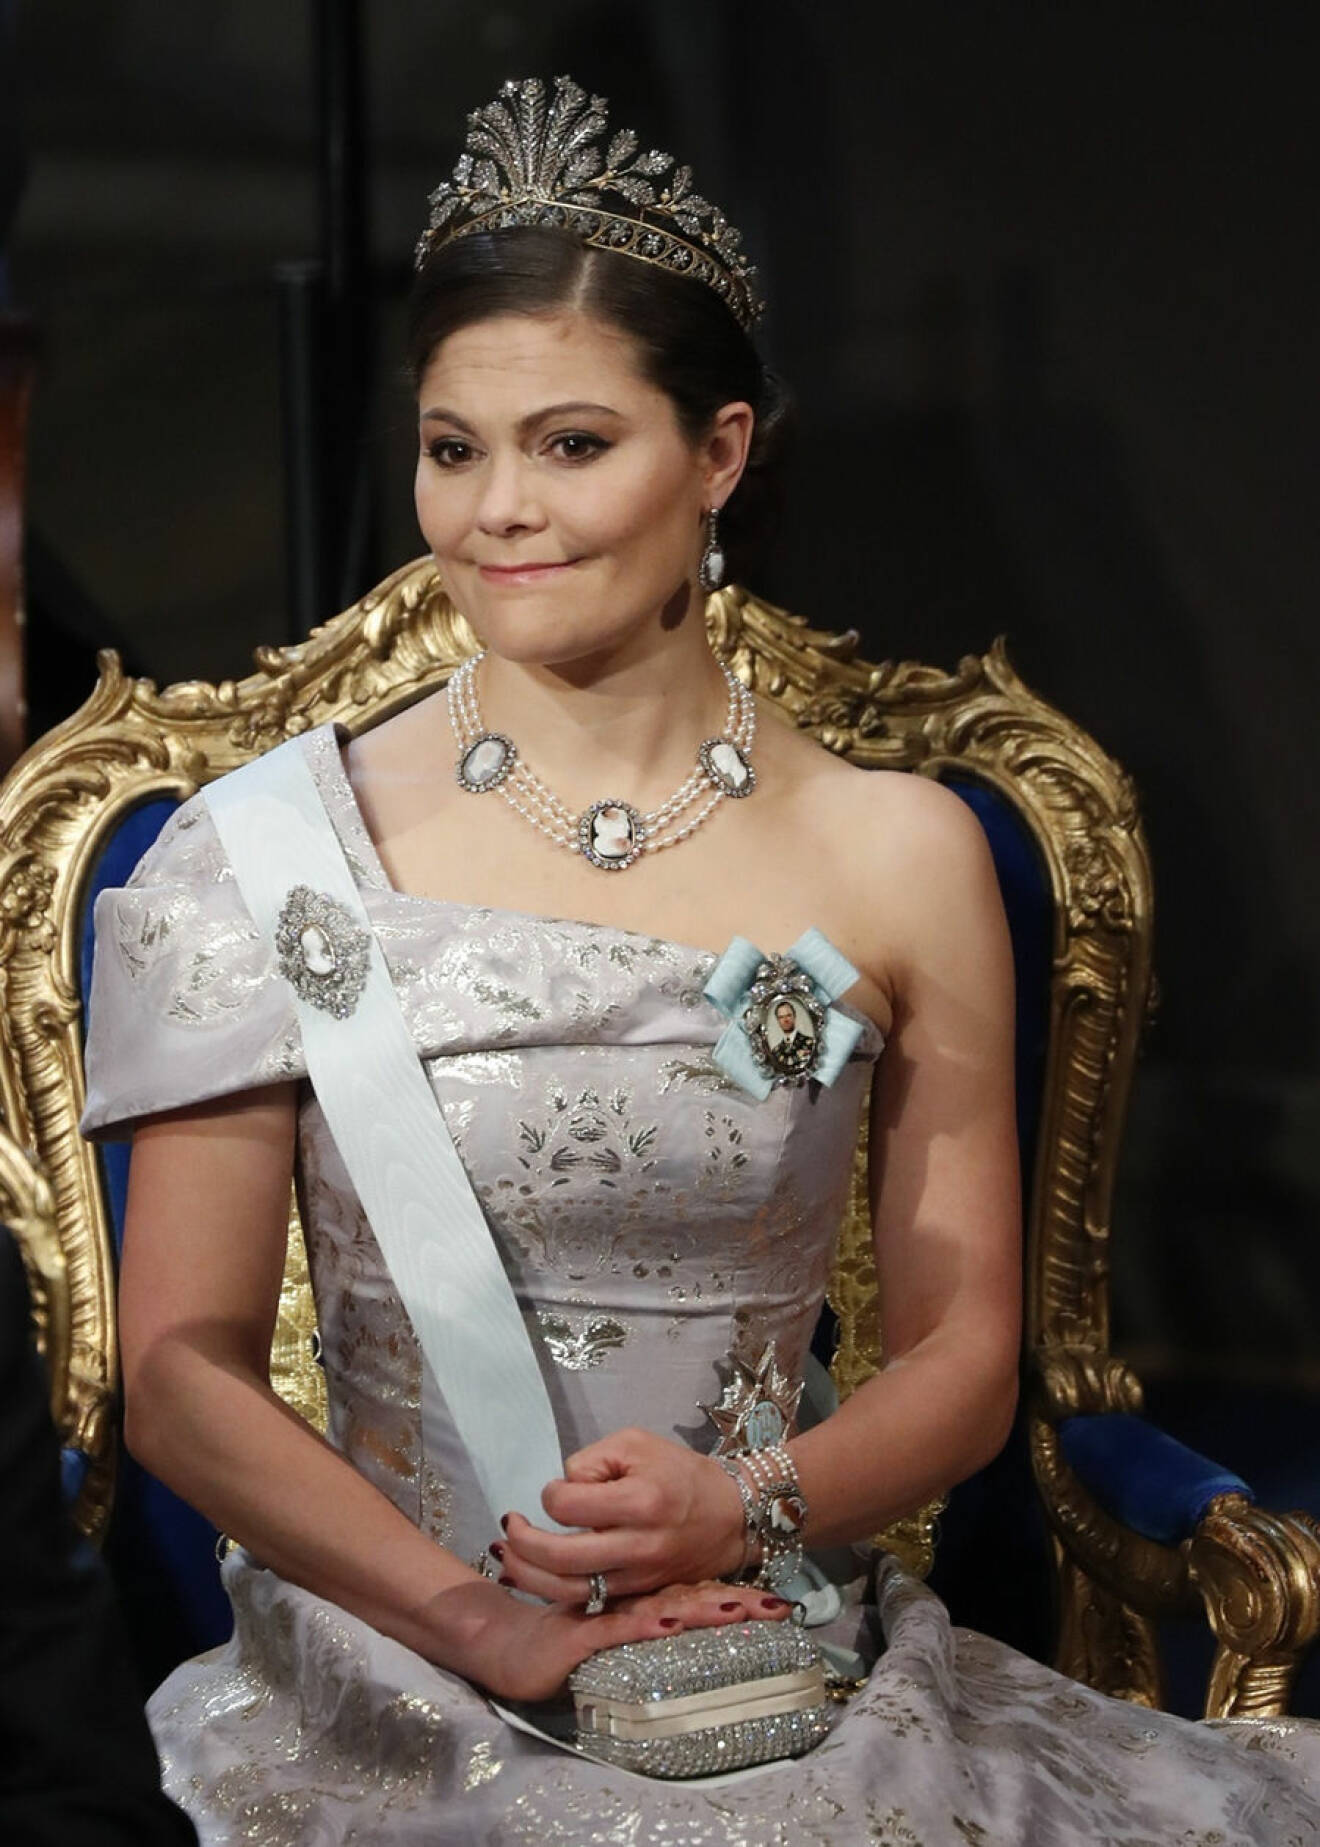 6849095 STOCKHOLM 2016-12-10. The Nobel Prize 2016. The Nobel Prize Awards ceremony today took place in the Stockholm Concert Hall, in the presence of the Swedish Royal Family. Picture shows: Crown Princess Victoria of Sweden. COPYRIGHT STELLA PICTURES